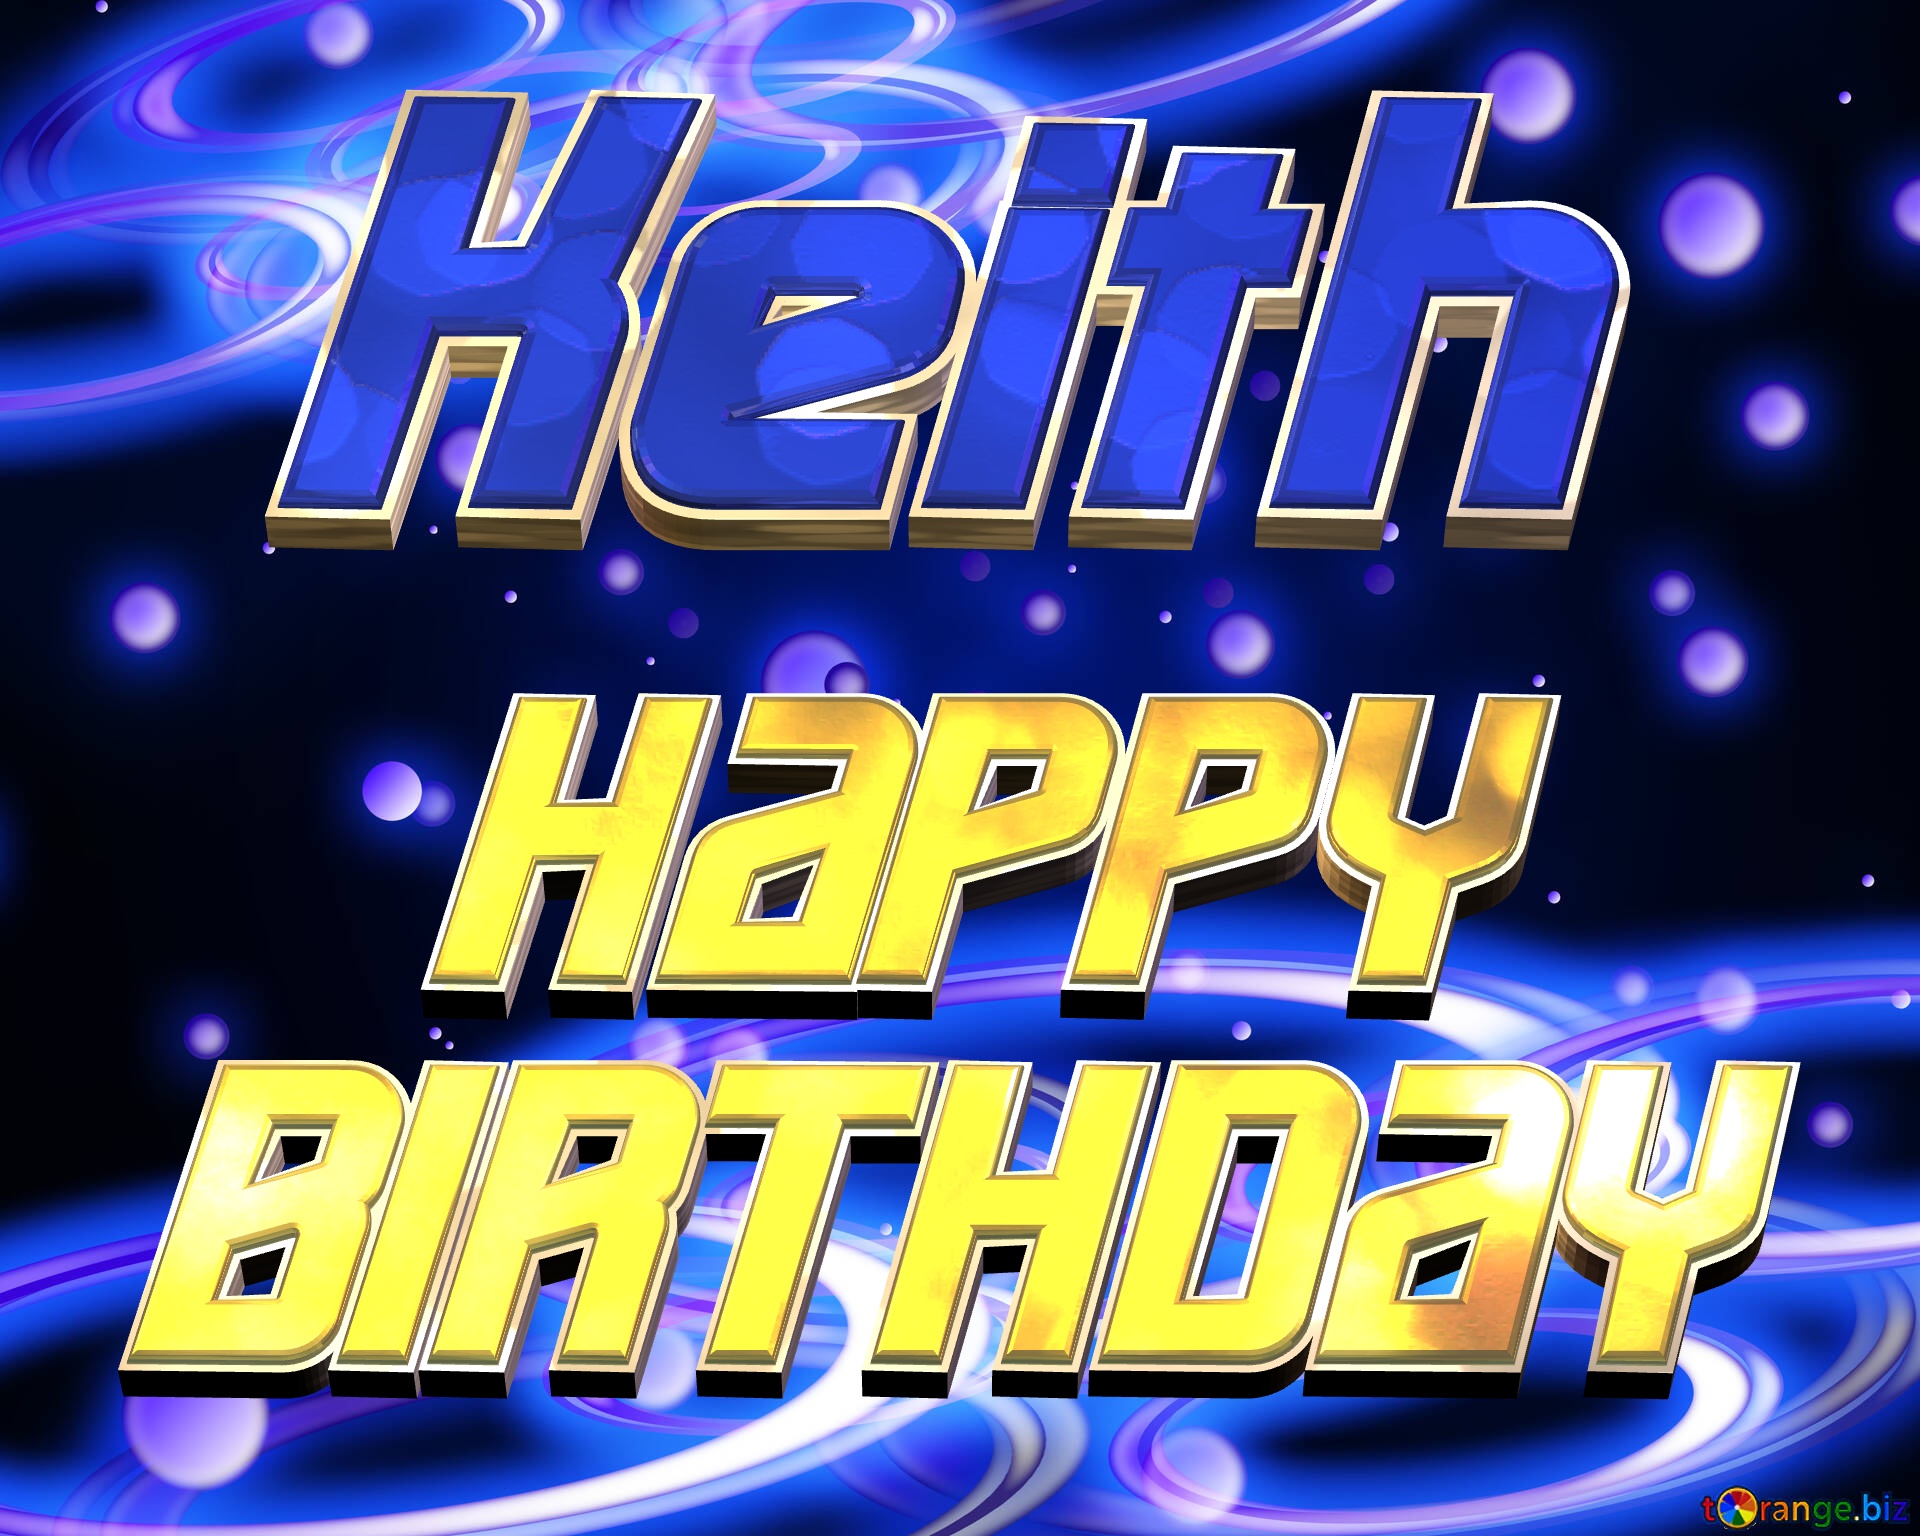 Keith Space Happy Birthday! Technology background №54919